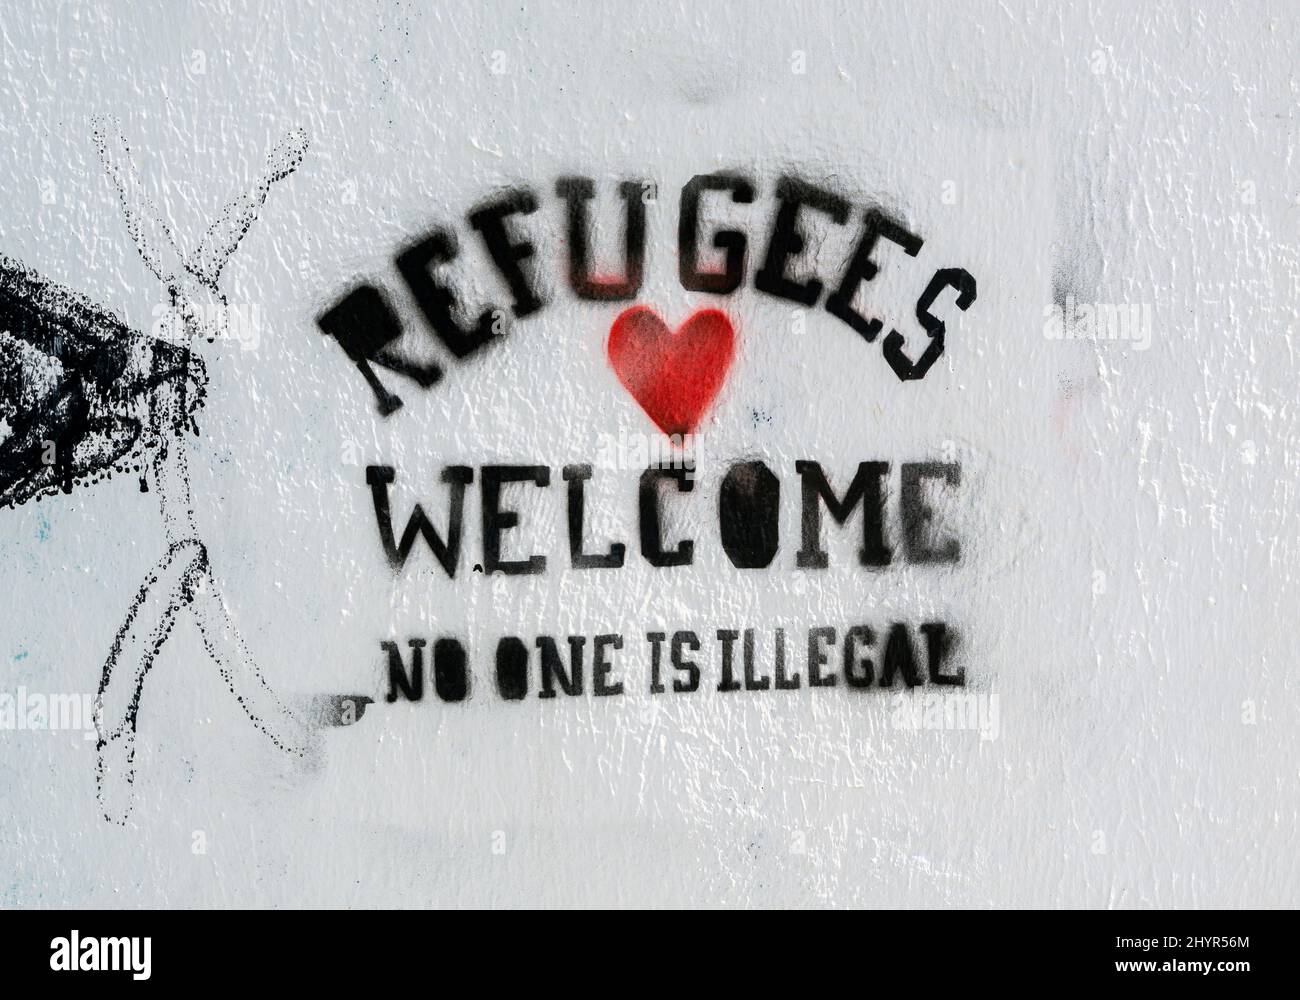 Stencil graffiti on white background saying Refugees welcome no one is illegal Stock Photo